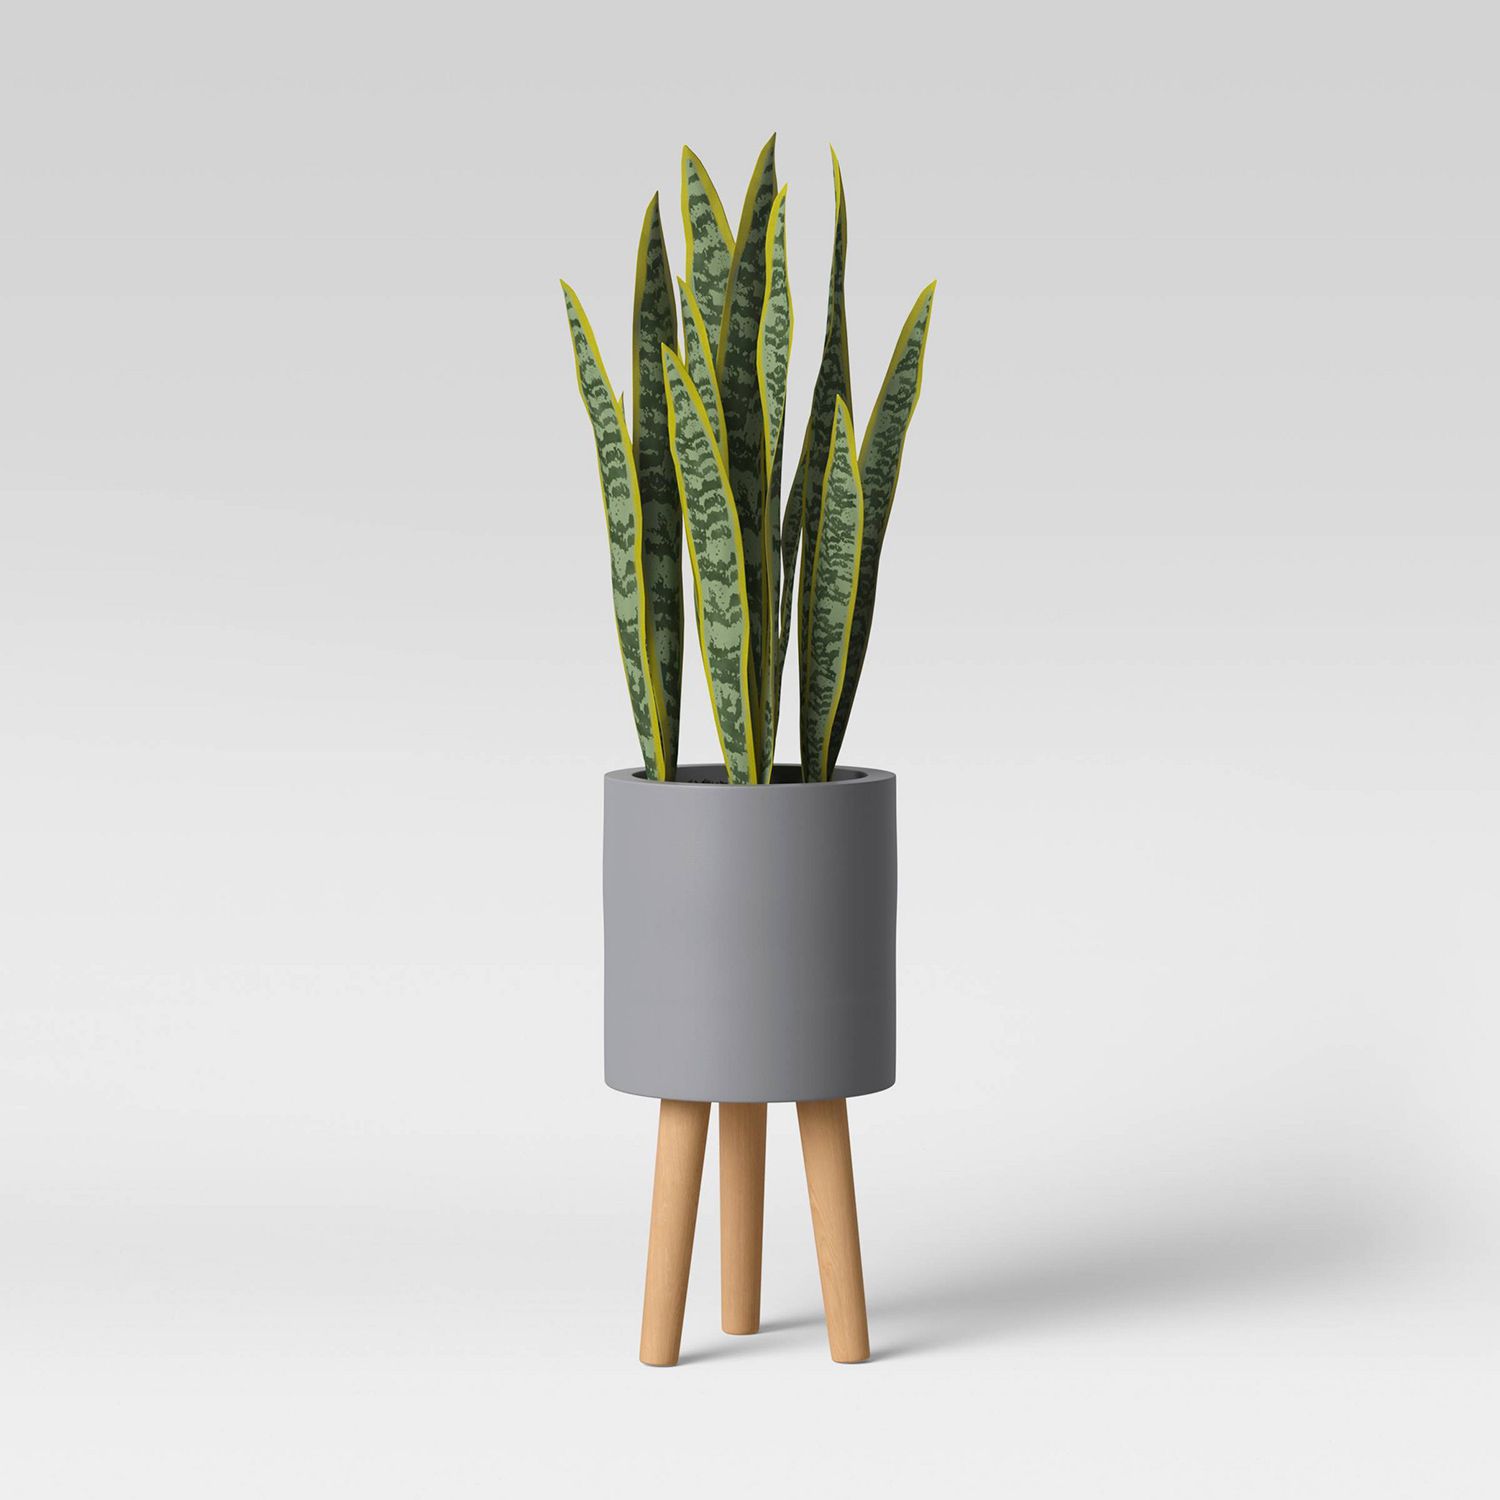 Faux Snake Floor Plant in Pot with Legs Gray/Green - Project 62